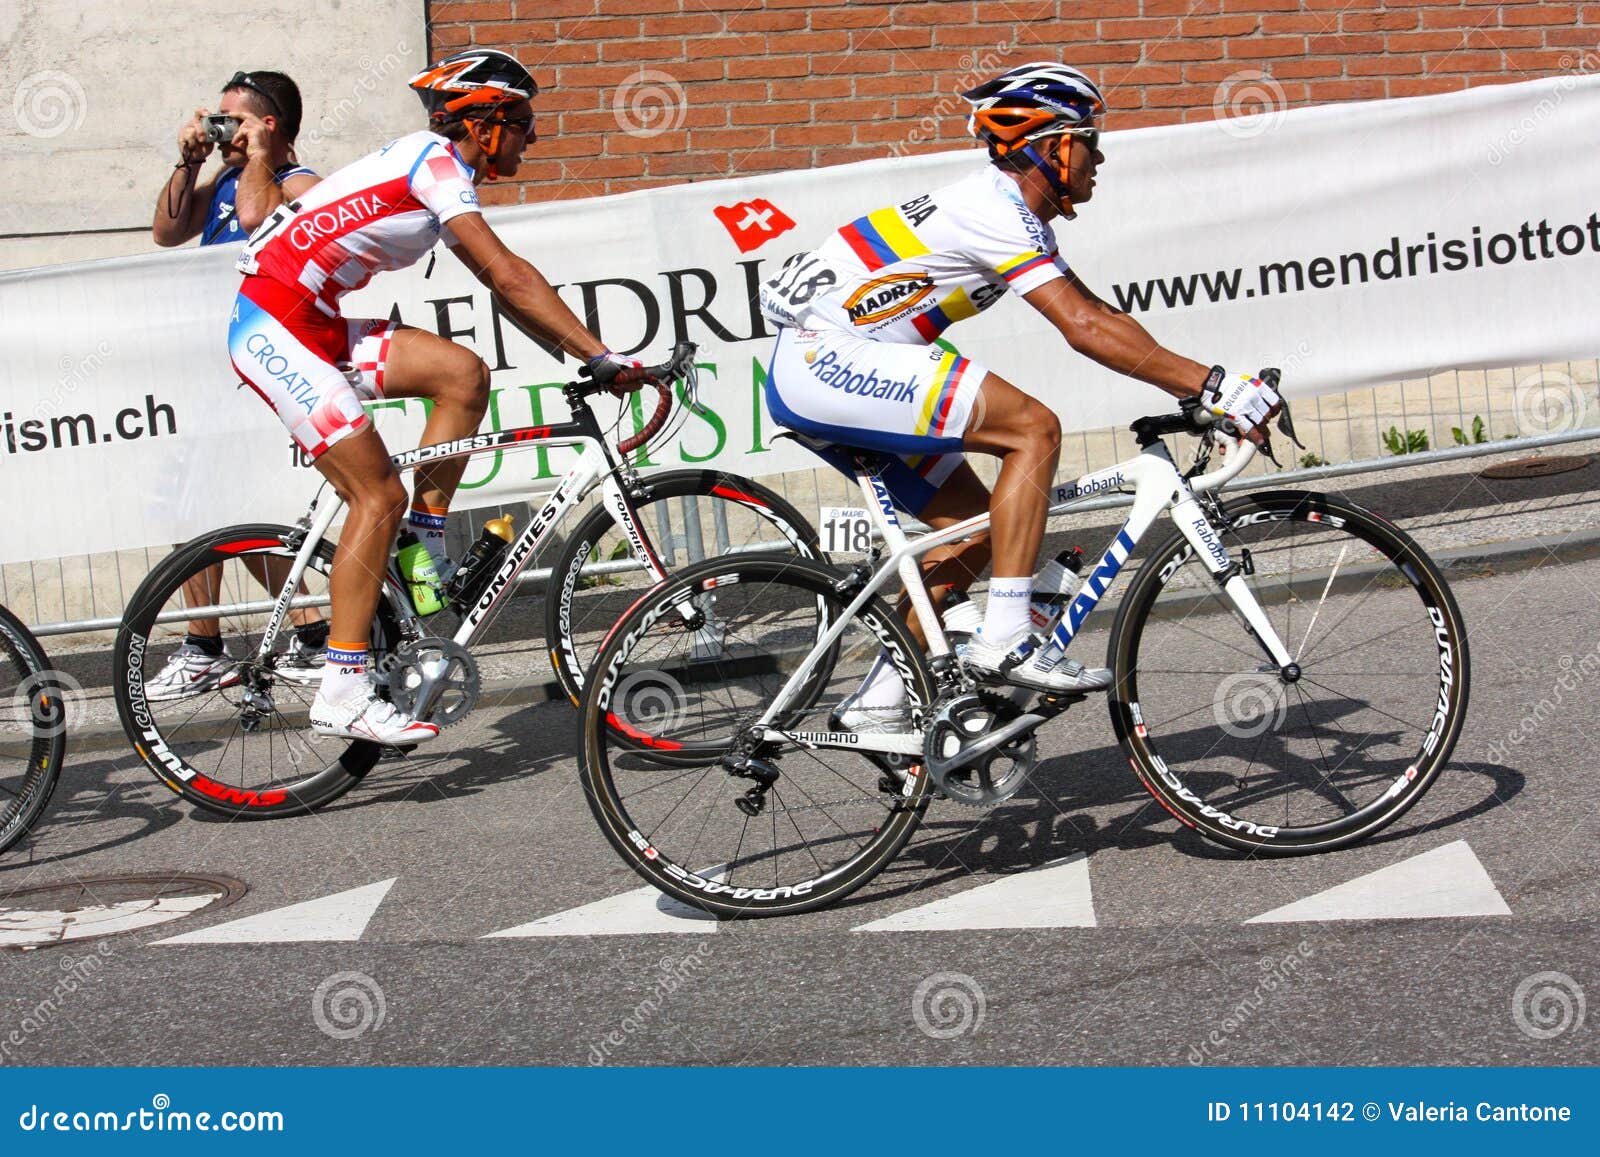 Cycling - UCI Road World Championships 2009 Editorial Photography ...